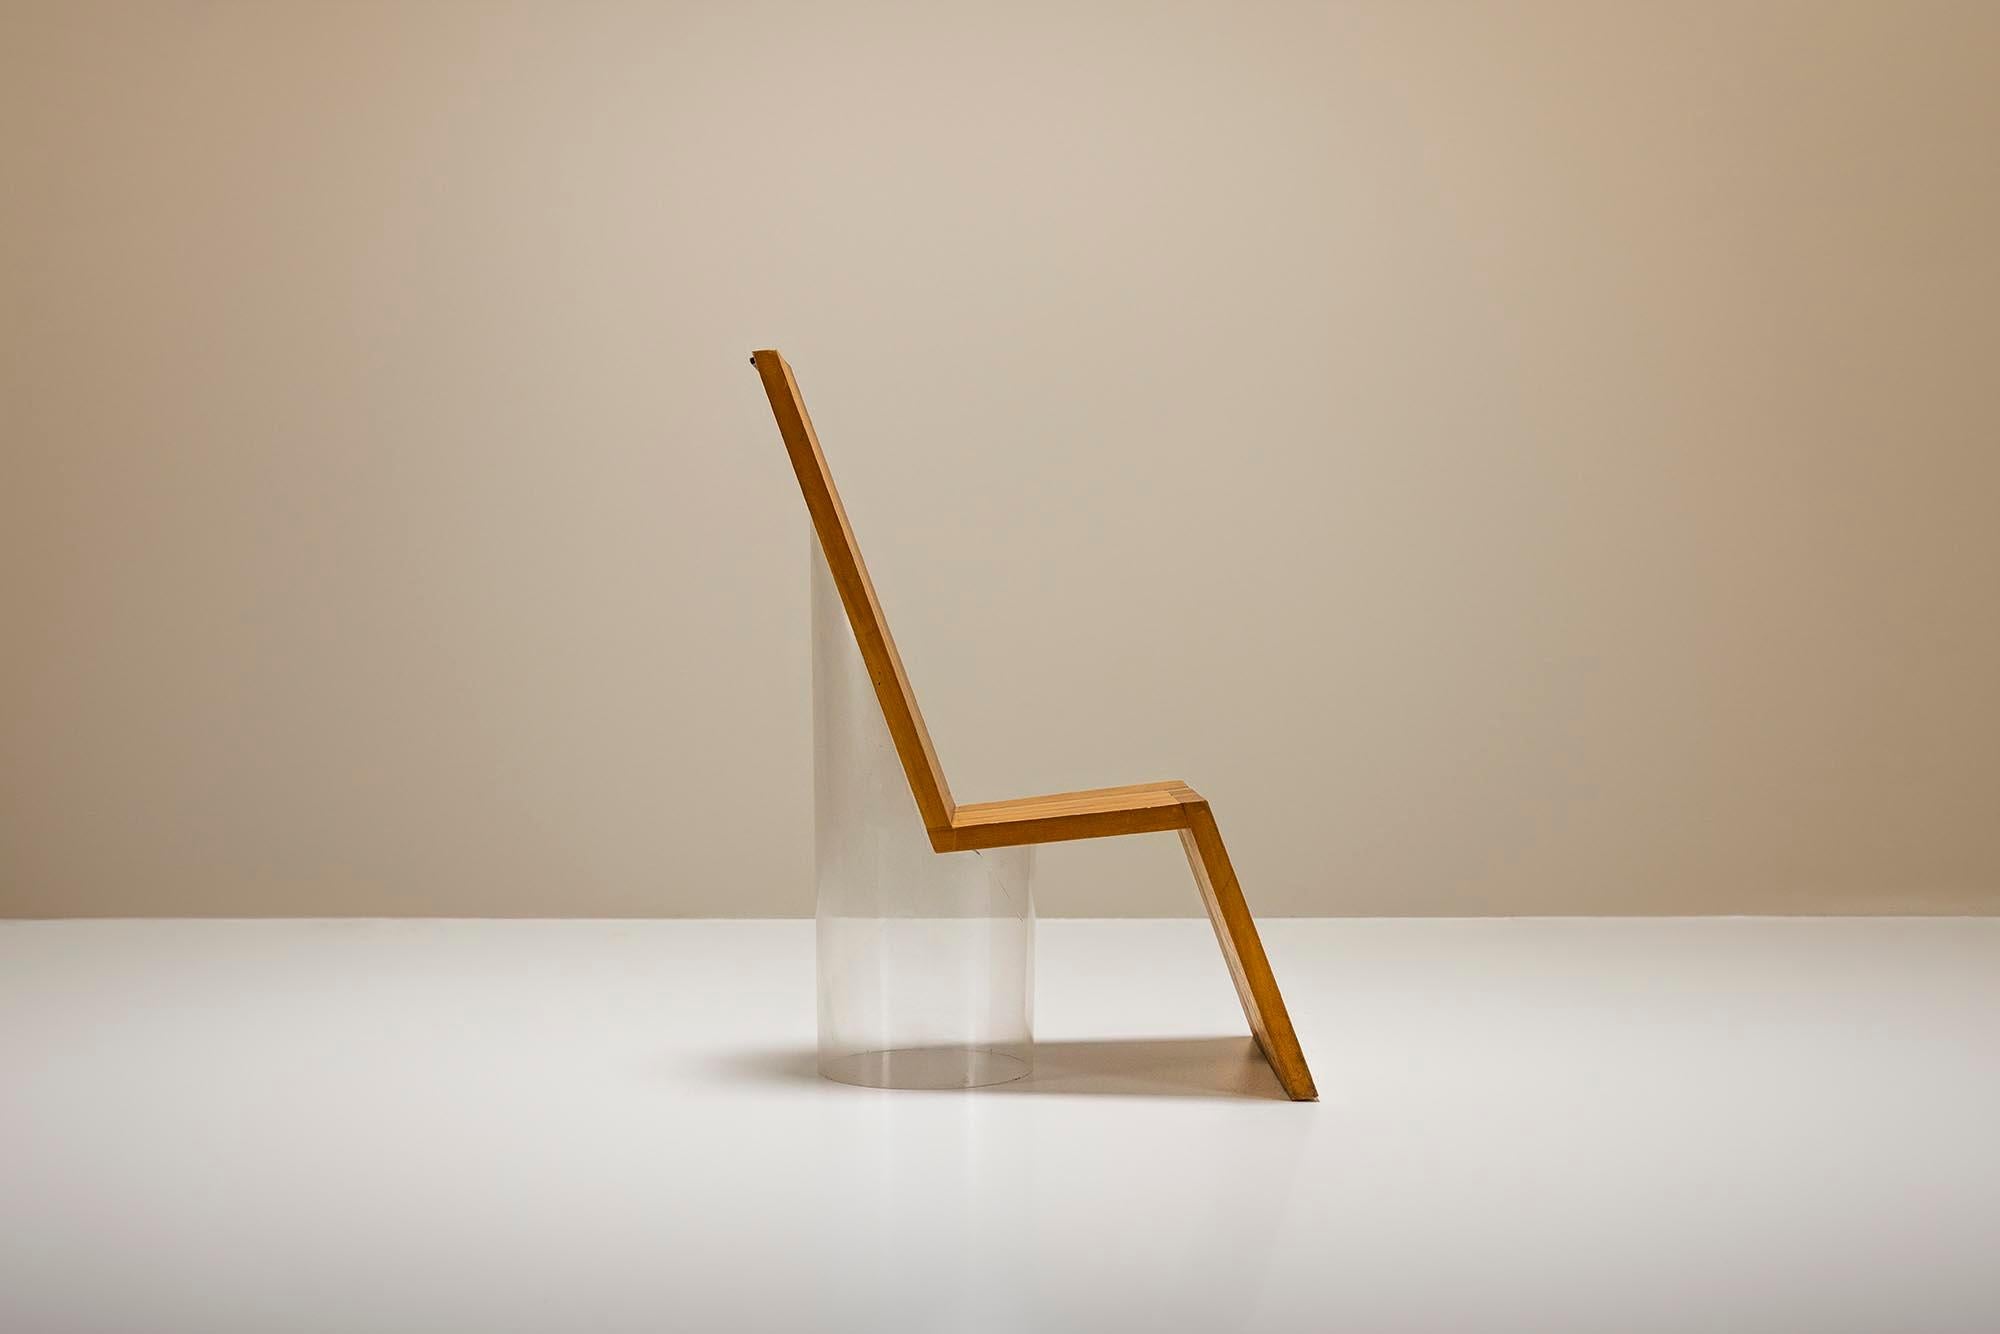 Late 20th Century Minimalistic Wall Resting Chair In Oak by F. Weerkamp, Netherlands 1980's